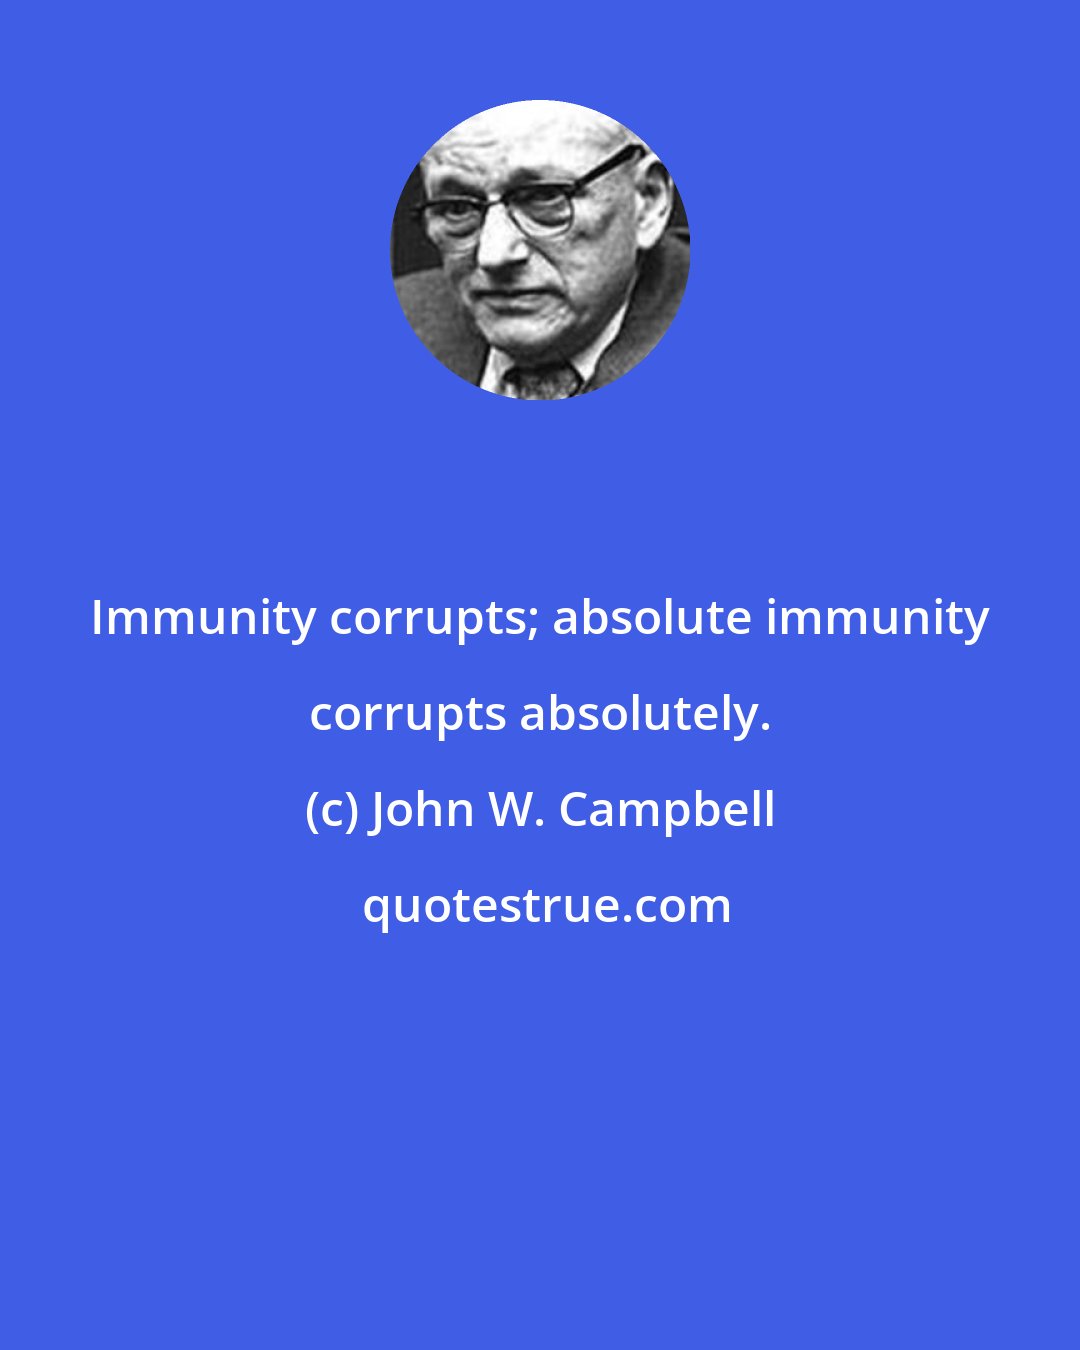 John W. Campbell: Immunity corrupts; absolute immunity corrupts absolutely.